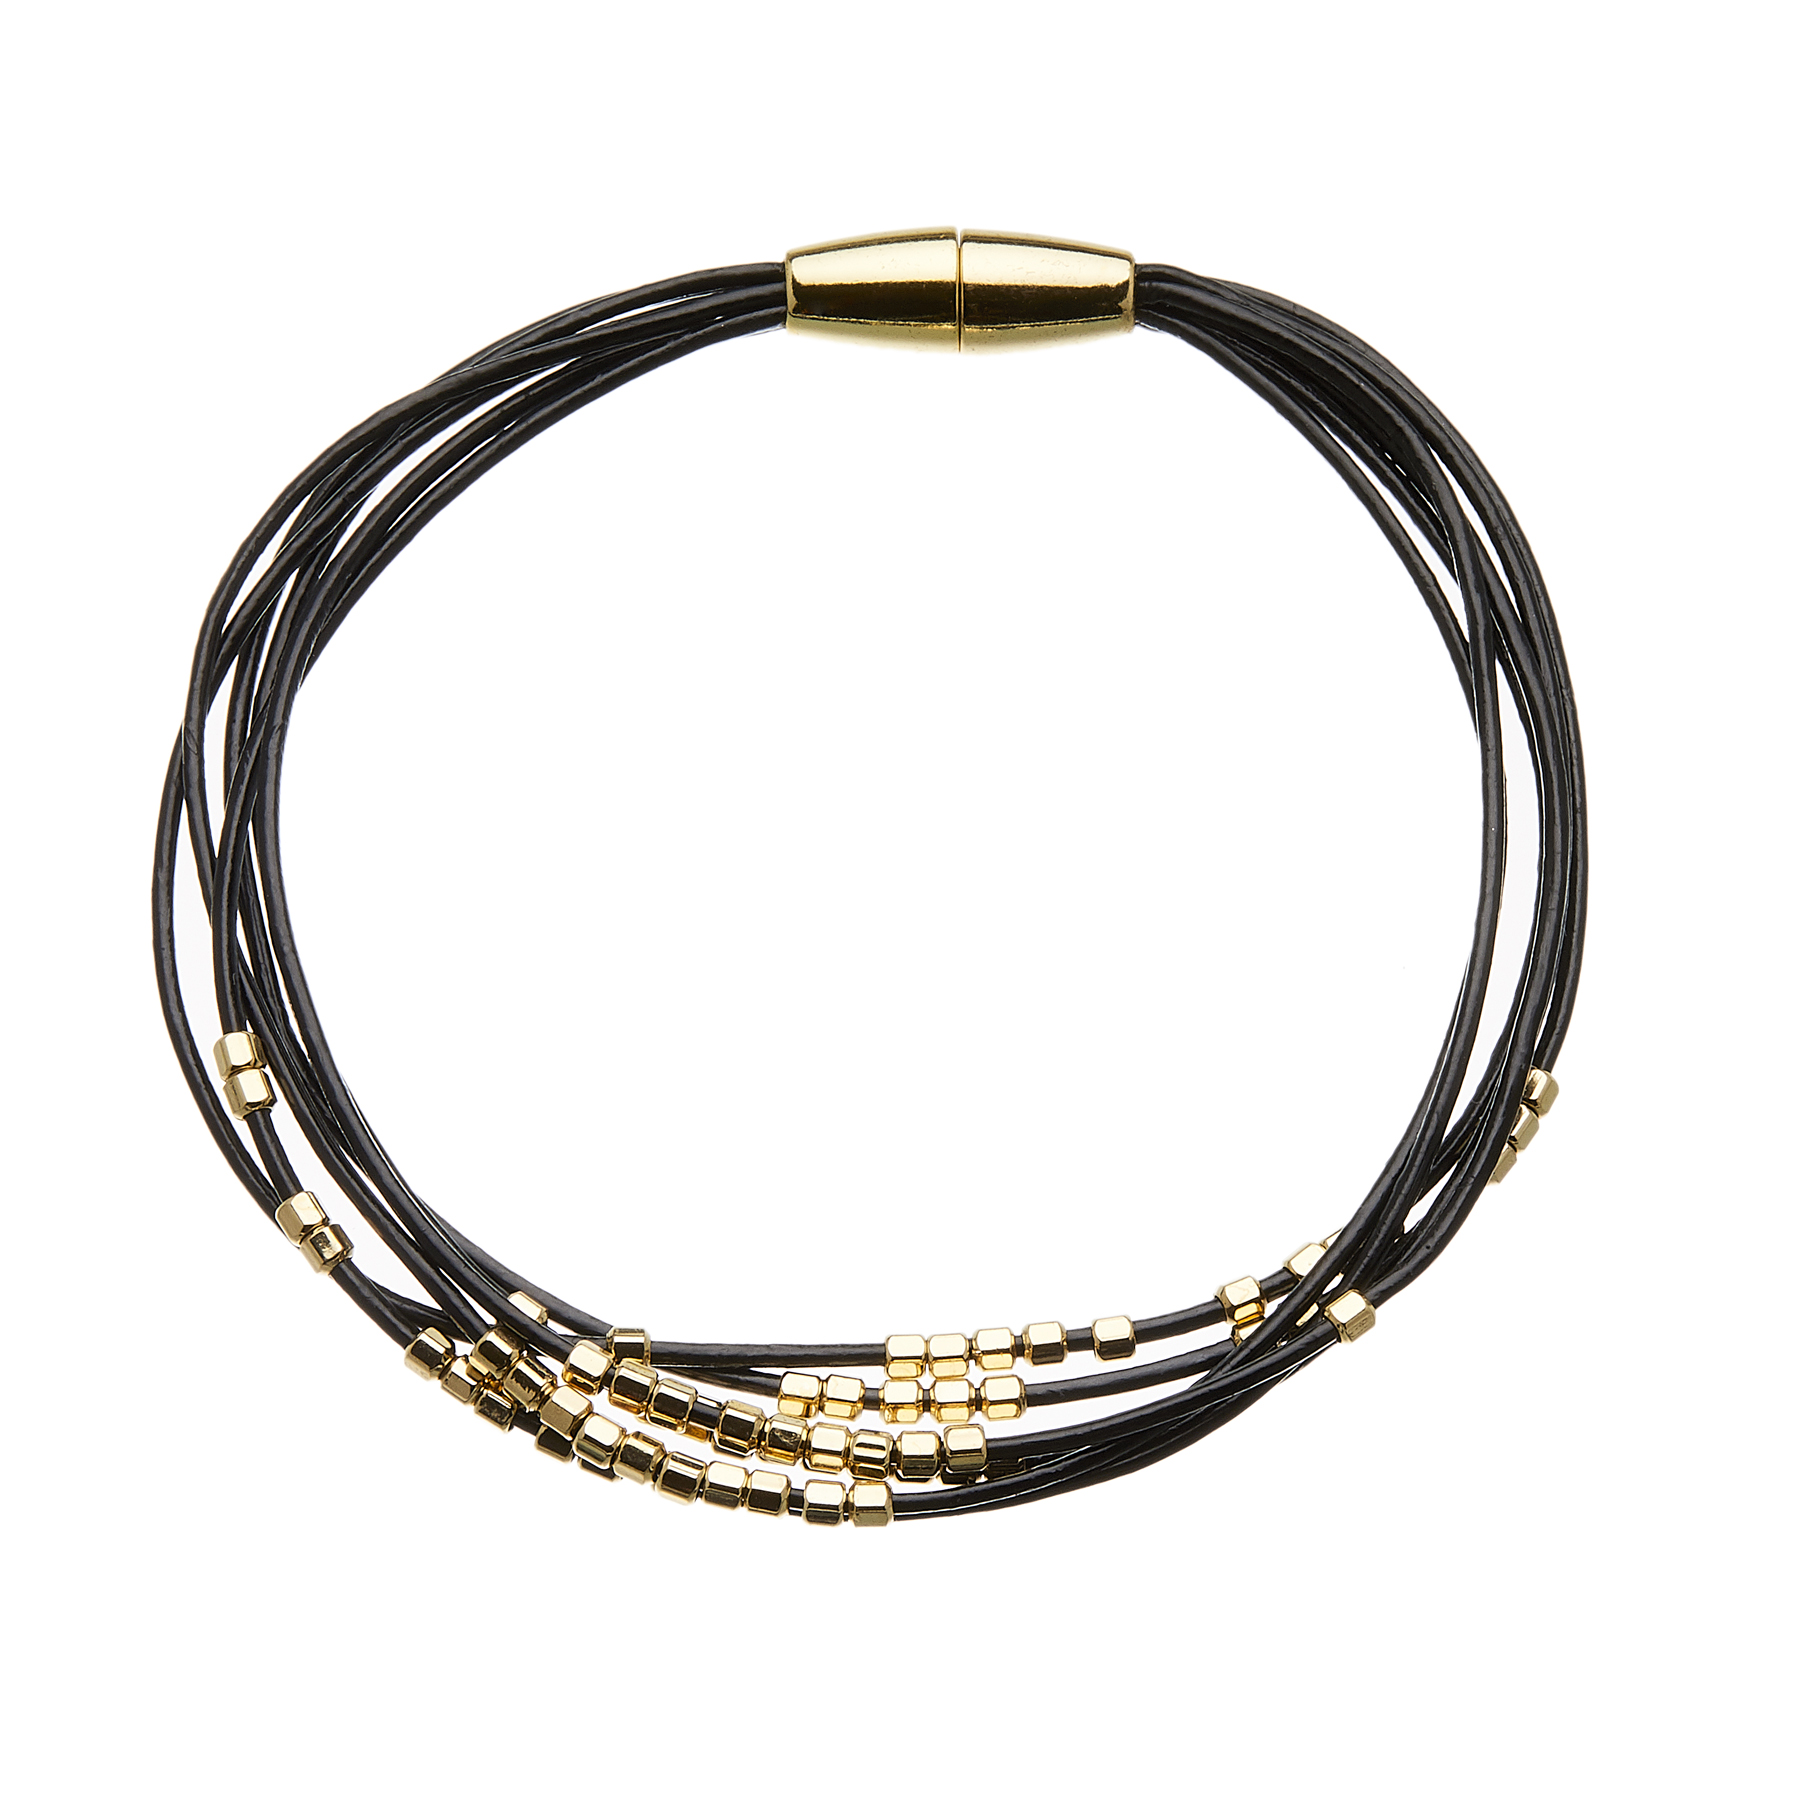 Bracelet with six black leather strands and gold beads - Reeva B